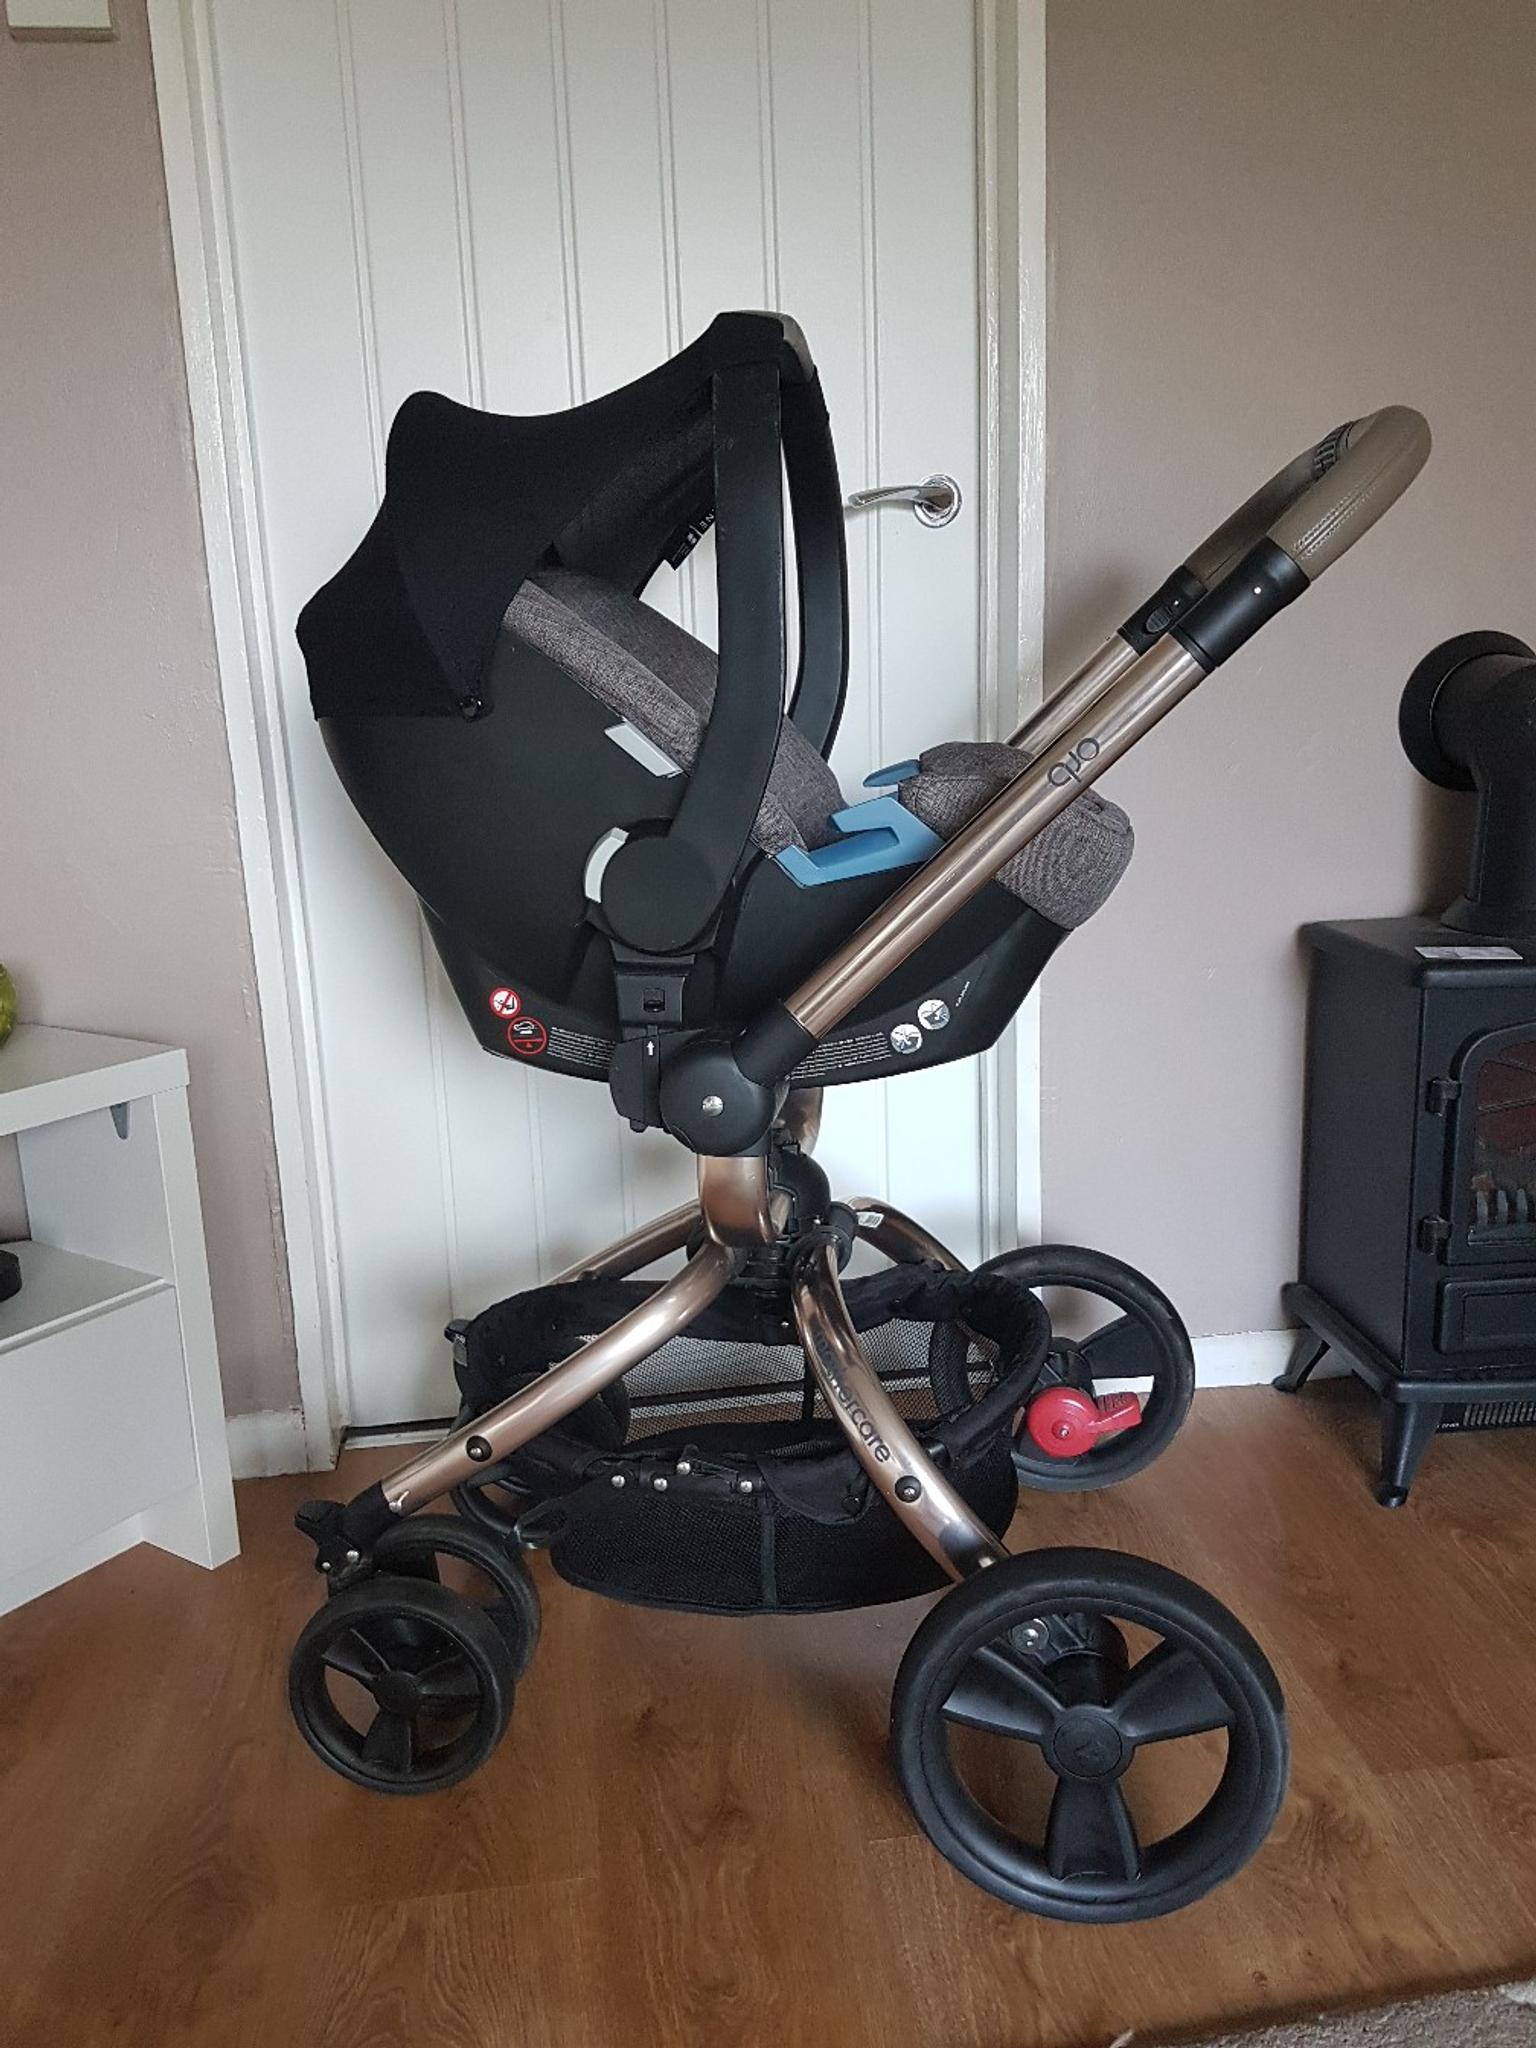 what car seat fits mothercare orb